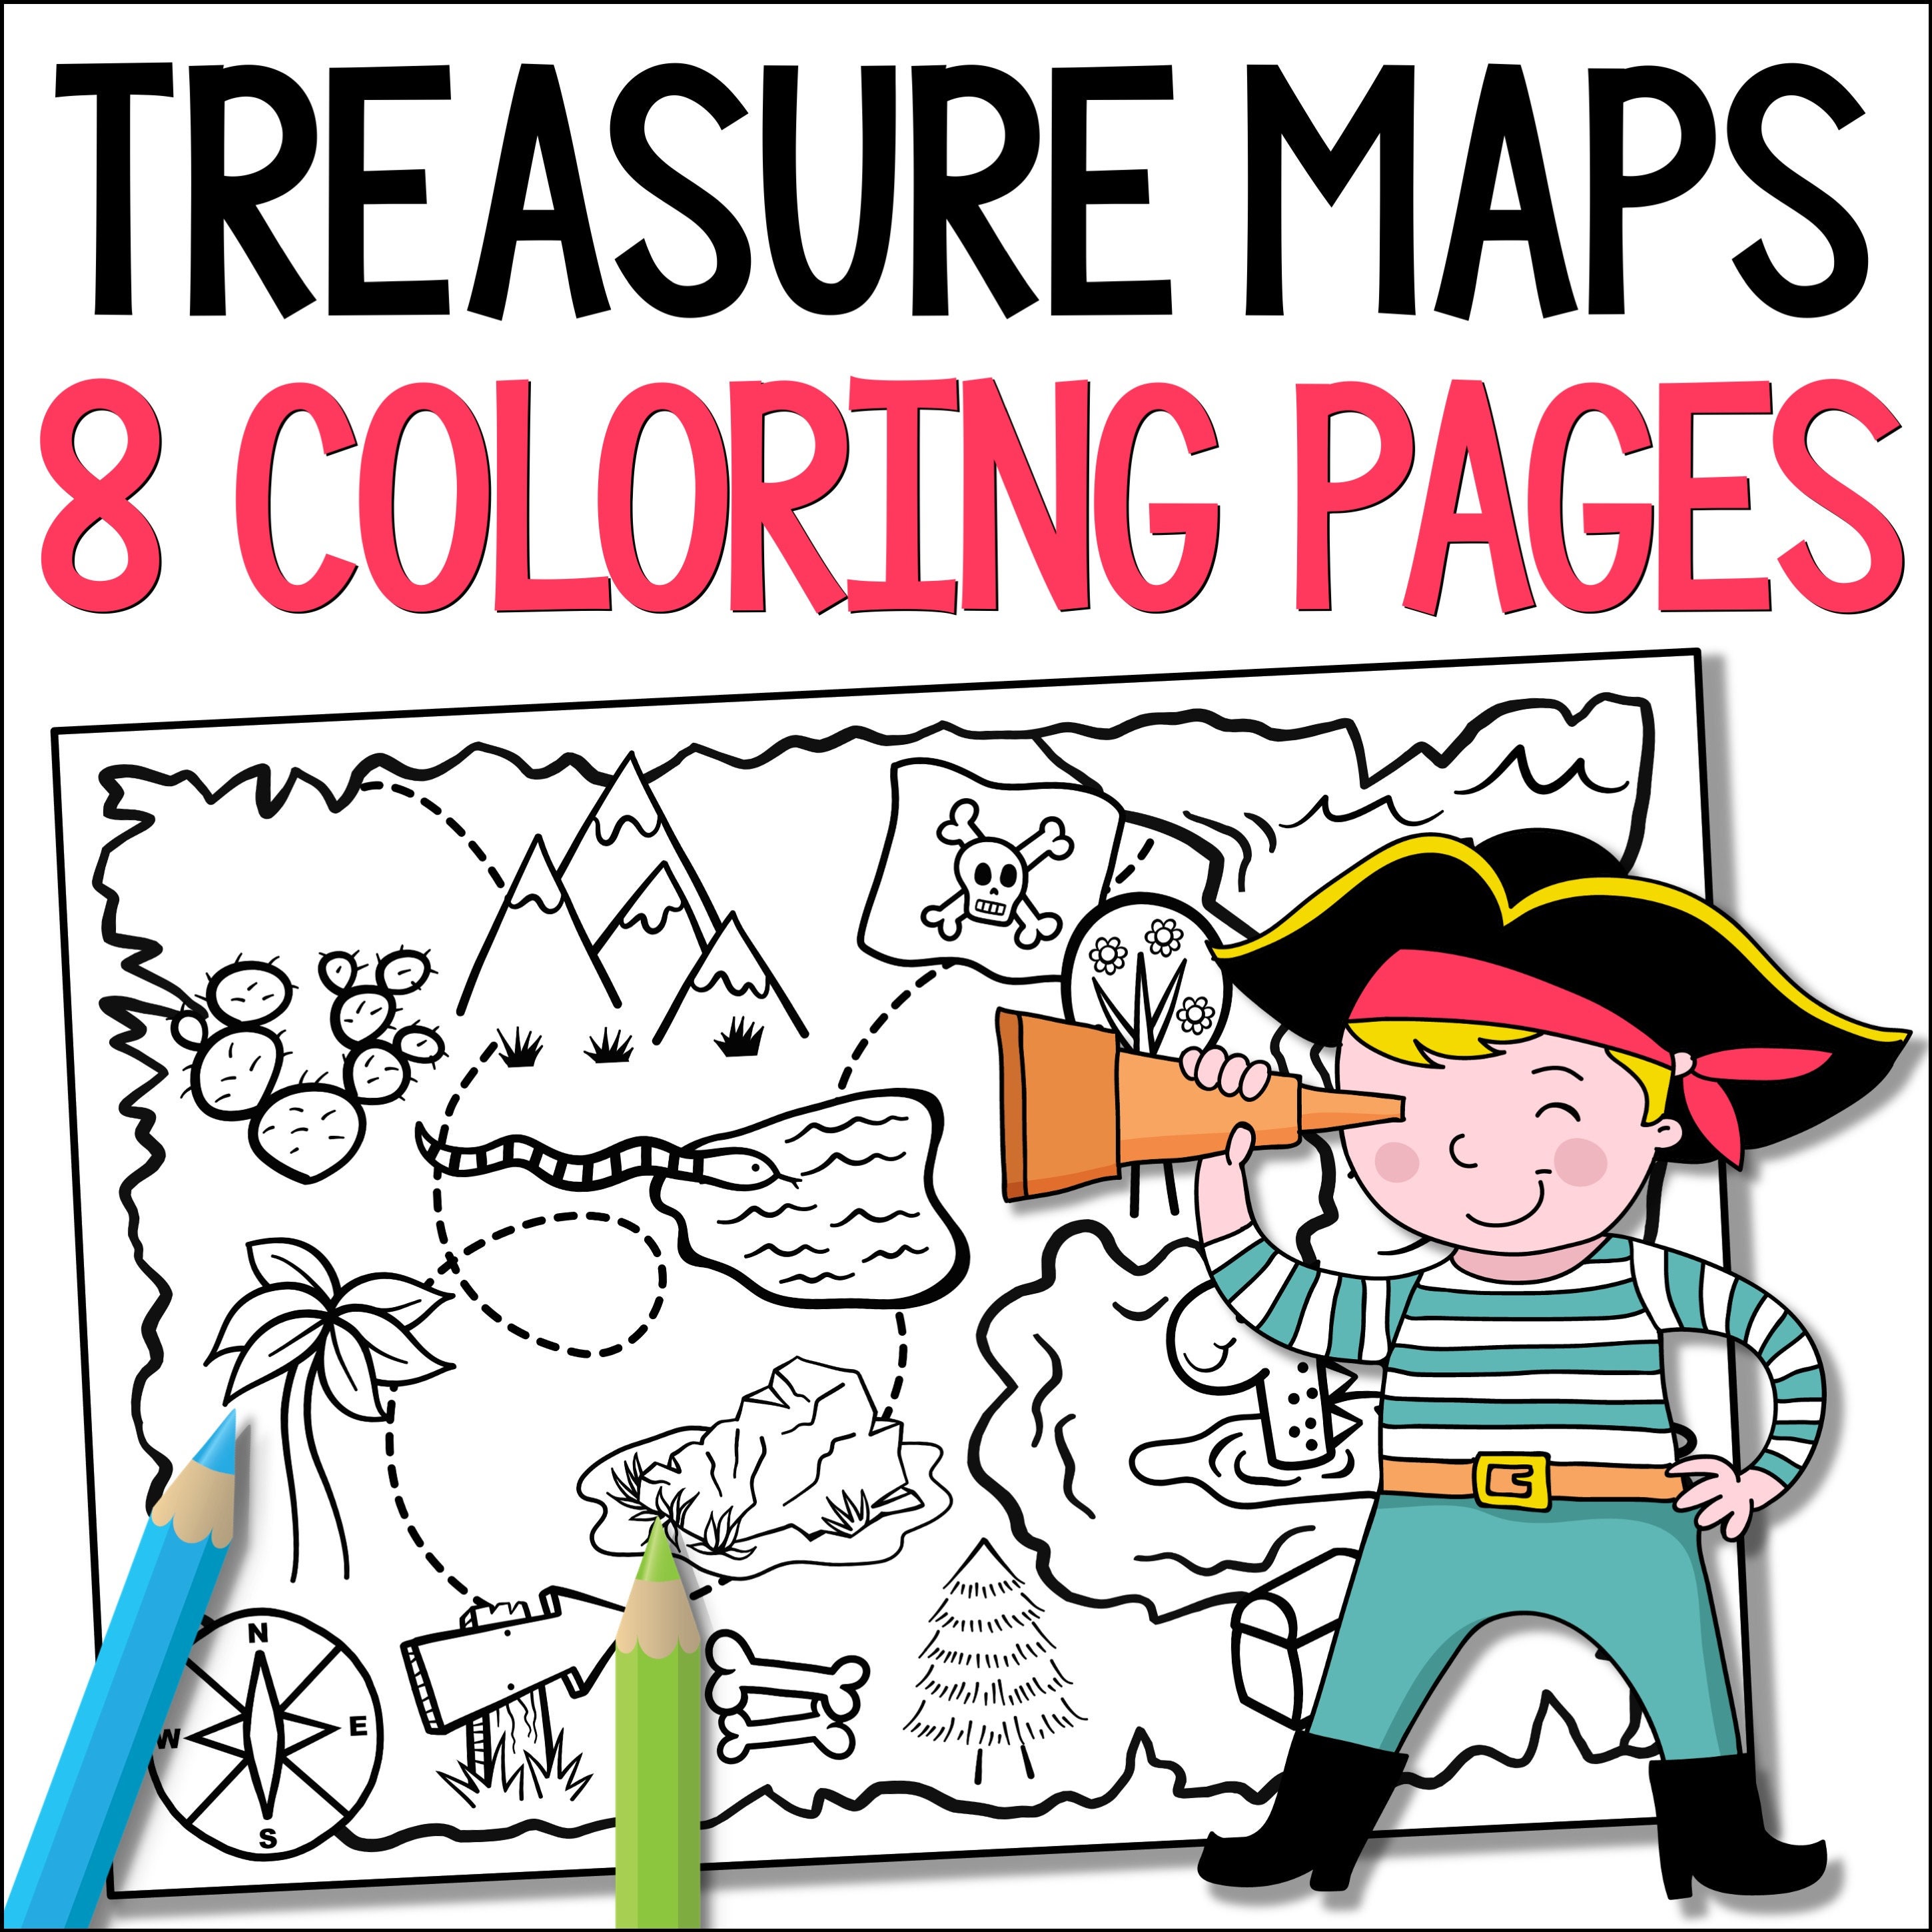 Map coloring page